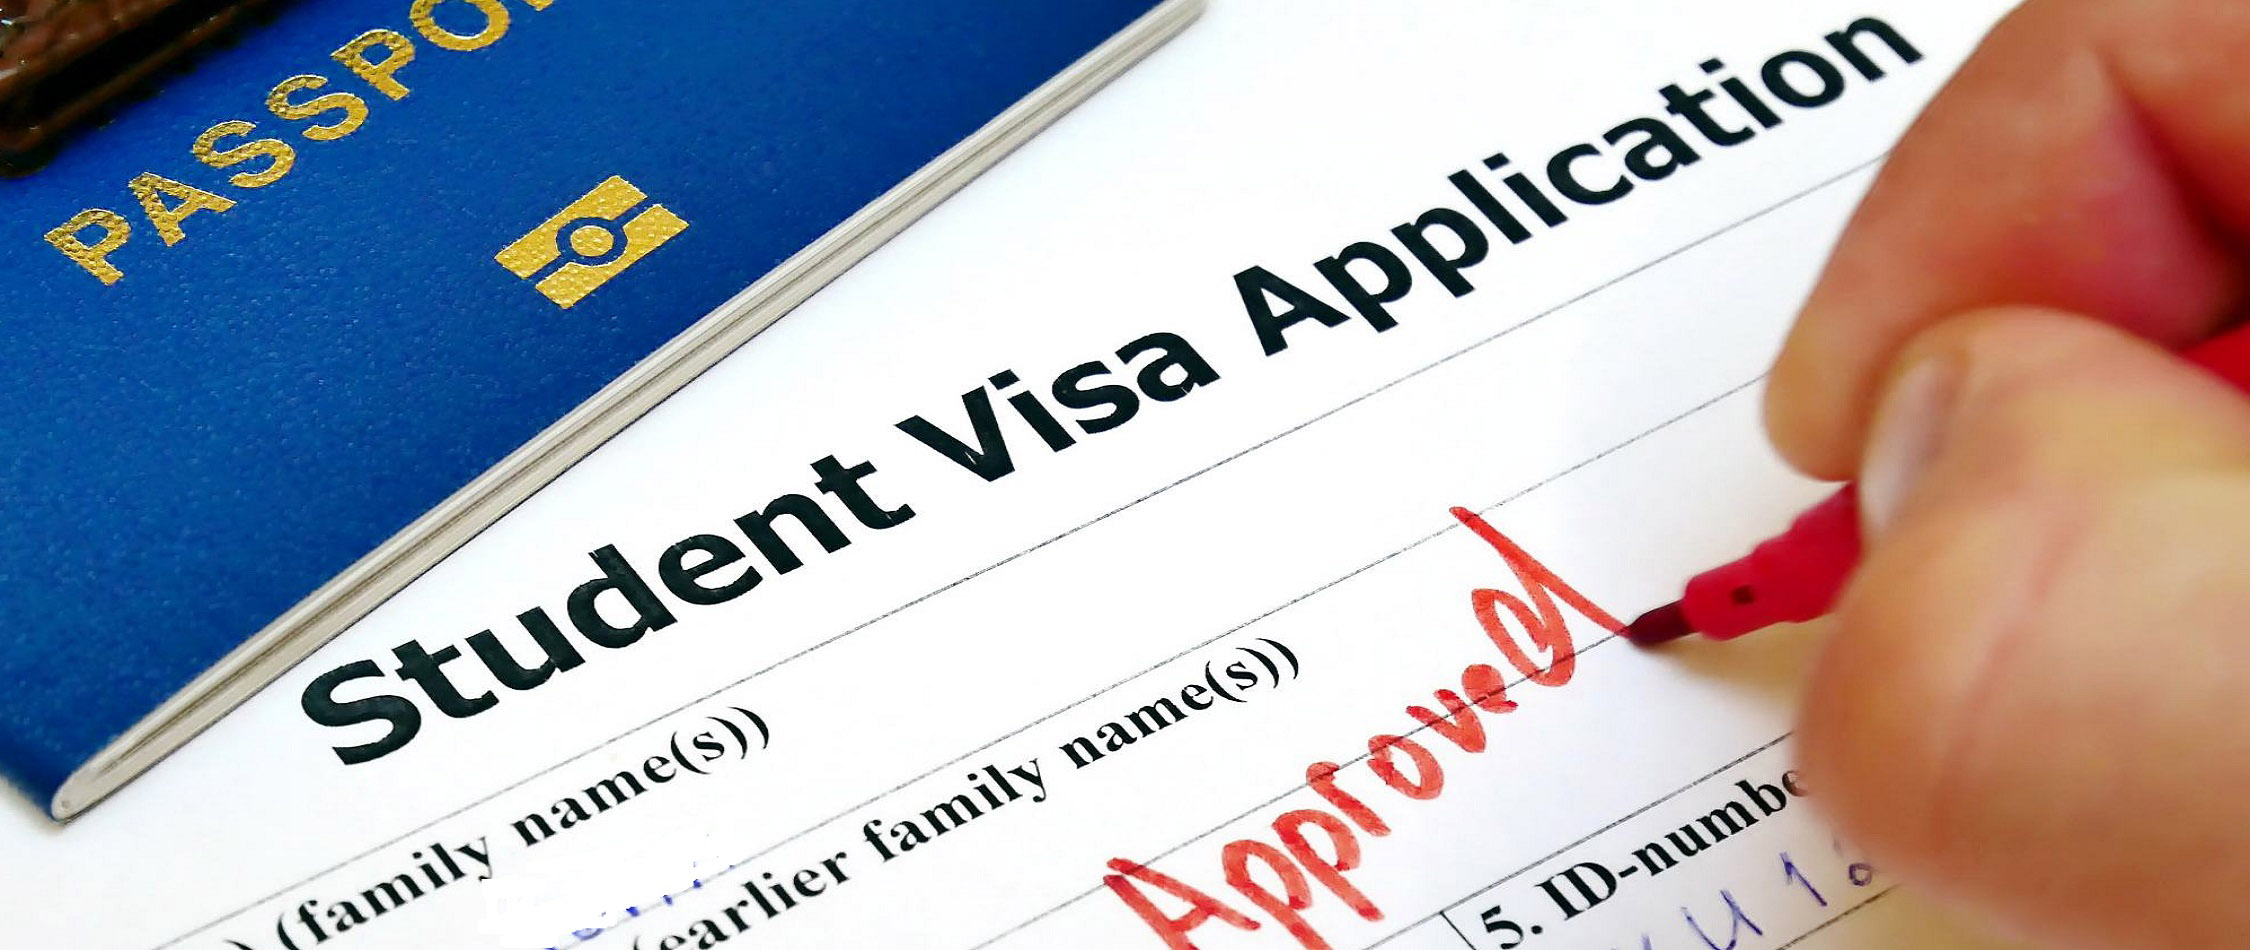 is sop required for uk student visa